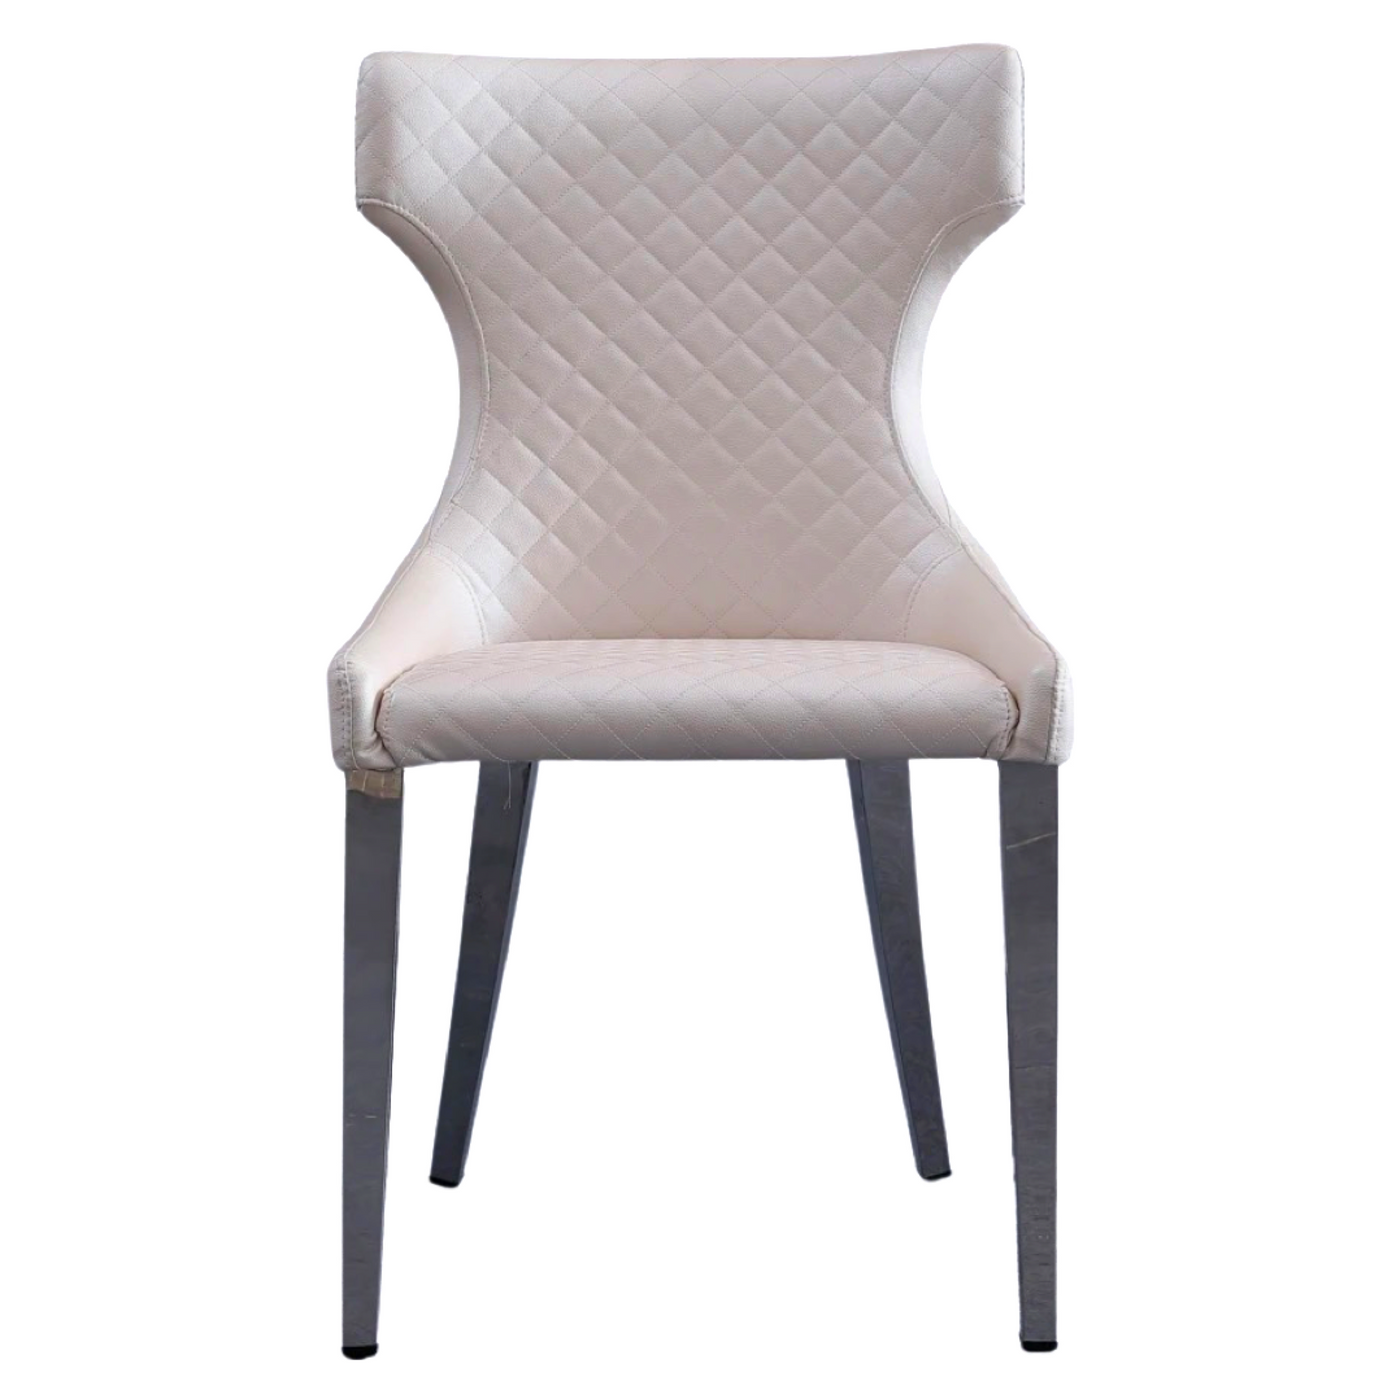 Maybelle Dining Chair